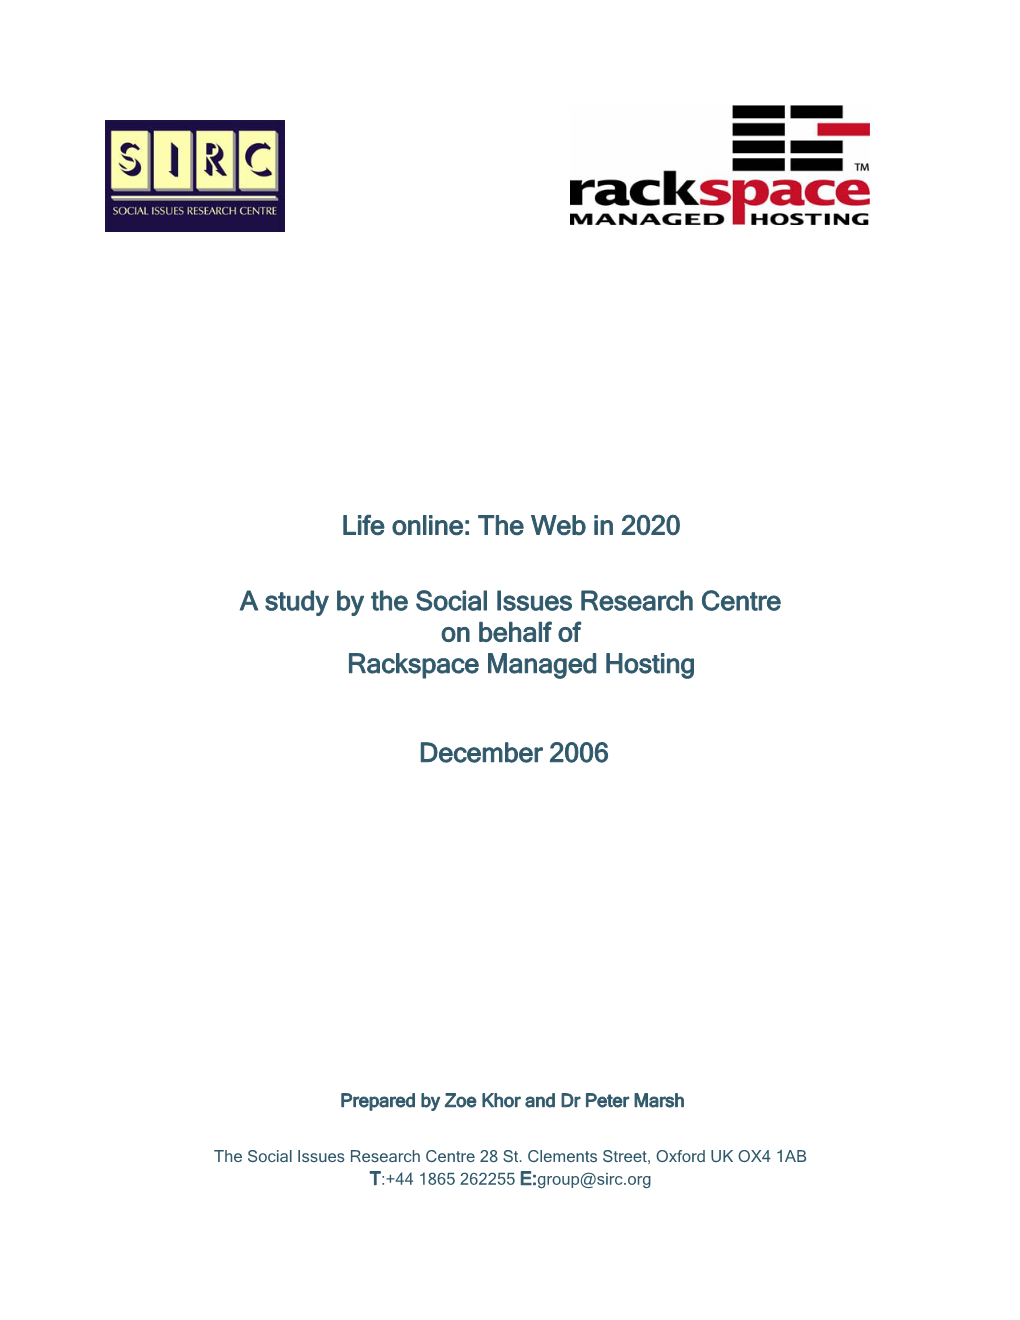 Life Online: the Web in 2020